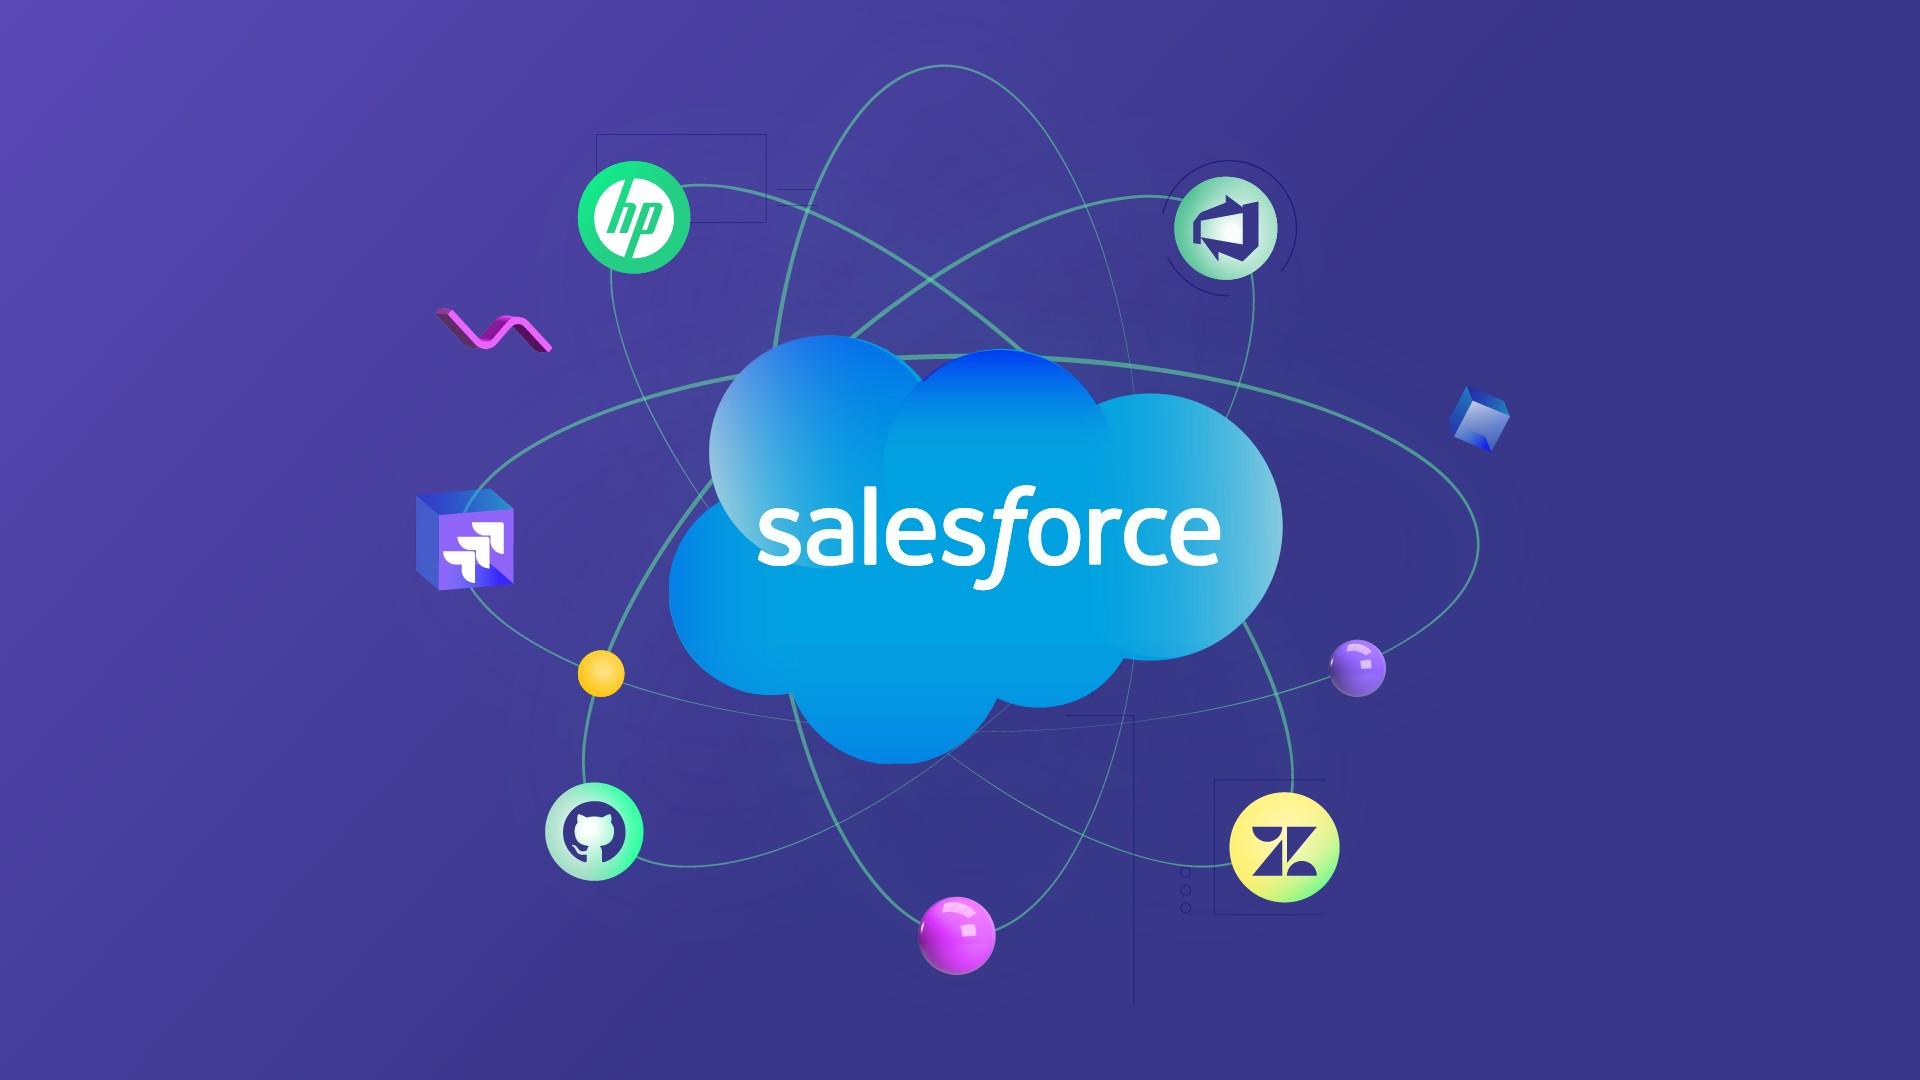 Automate Your Marketing Platform With Our Salesforce Marketing Cloud Services